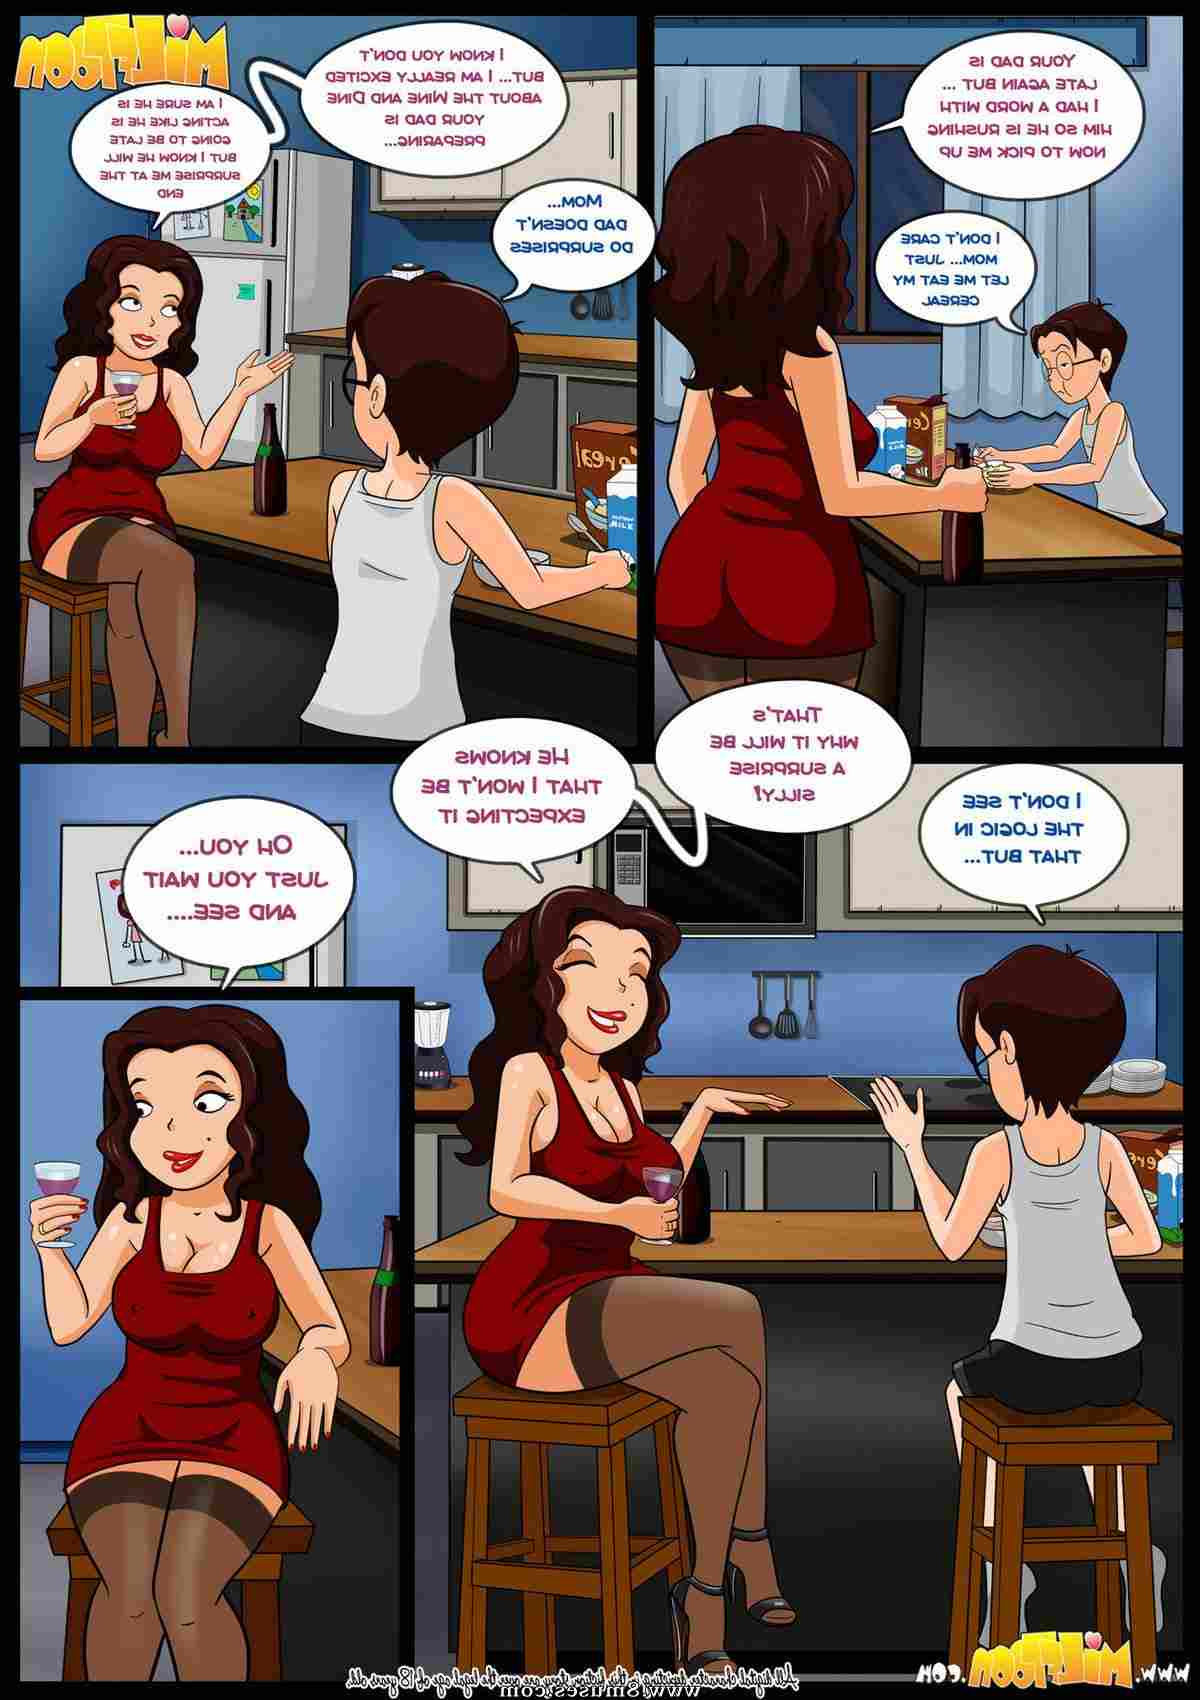 MilfToon-Comics/Wine-and-Dine Wine_and_Dine__8muses_-_Sex_and_Porn_Comics_6.jpg